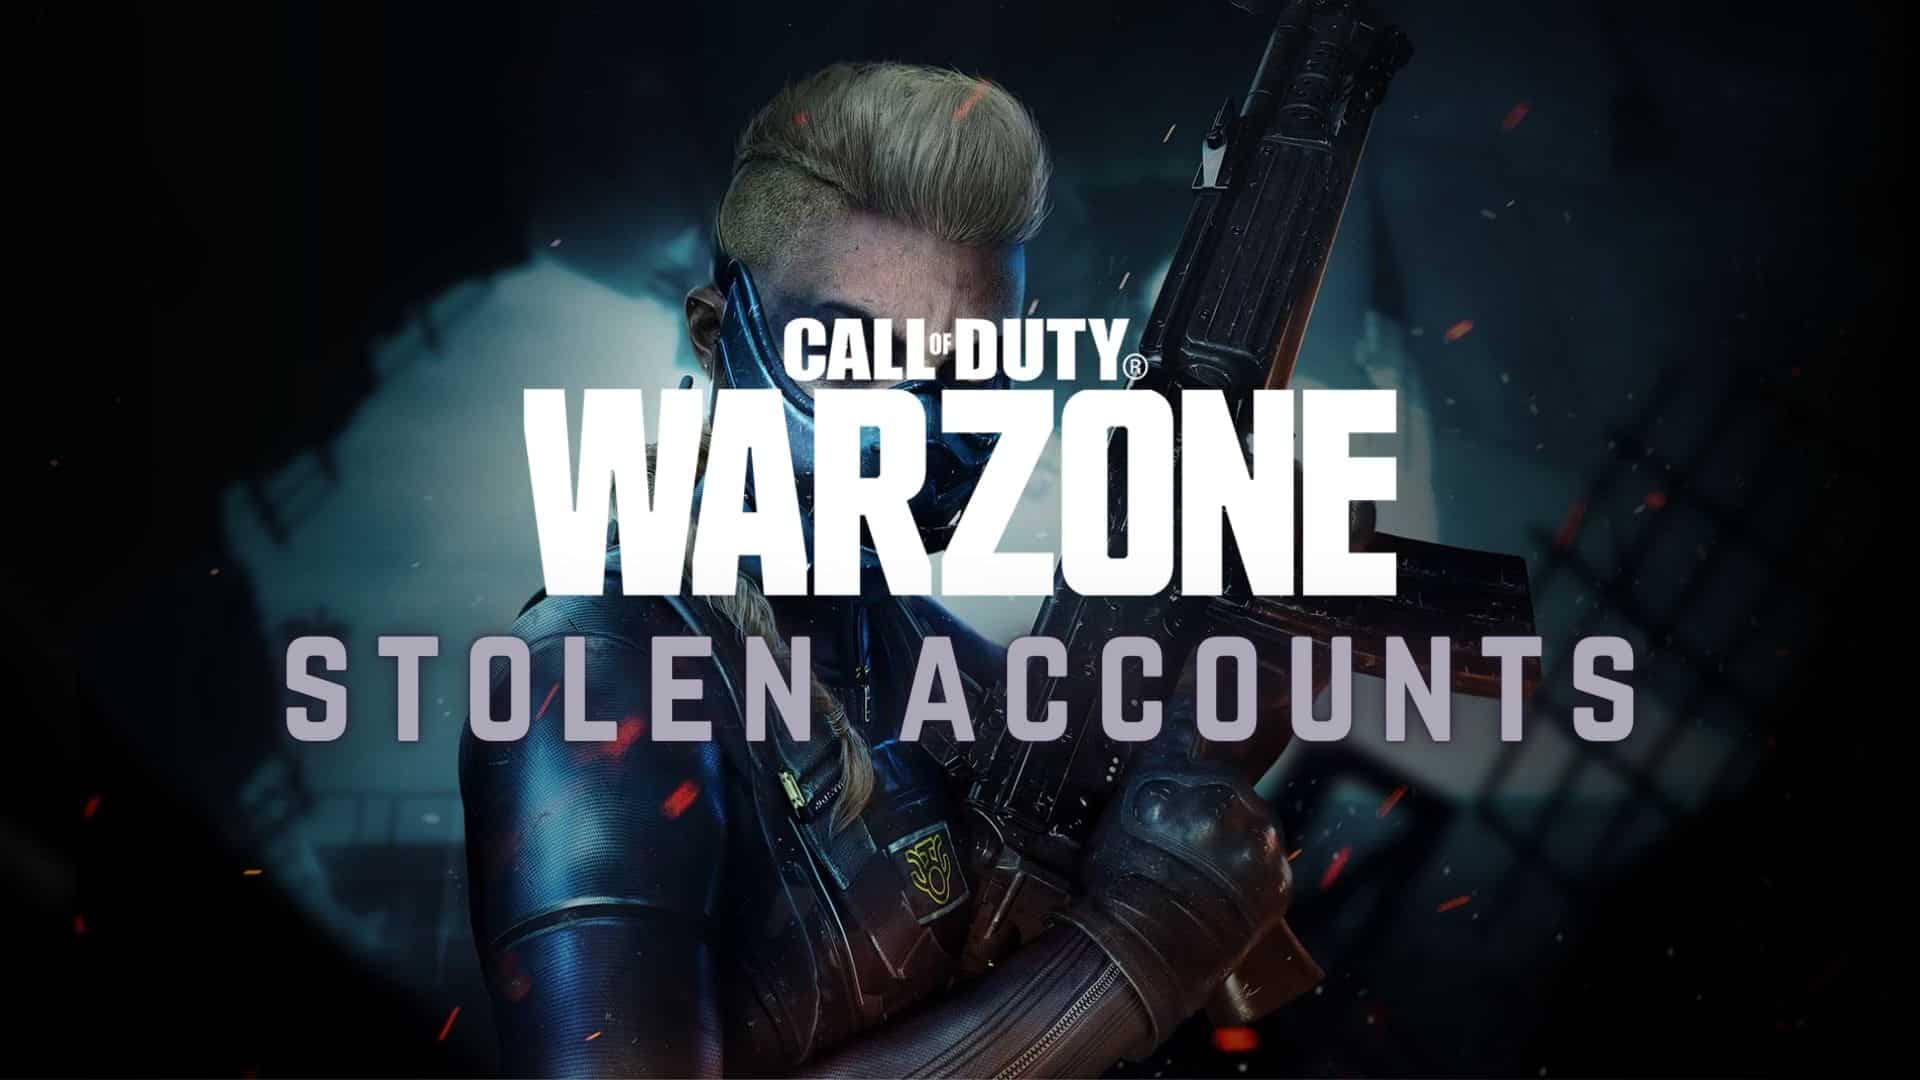 Warzone character and stolen accounts text